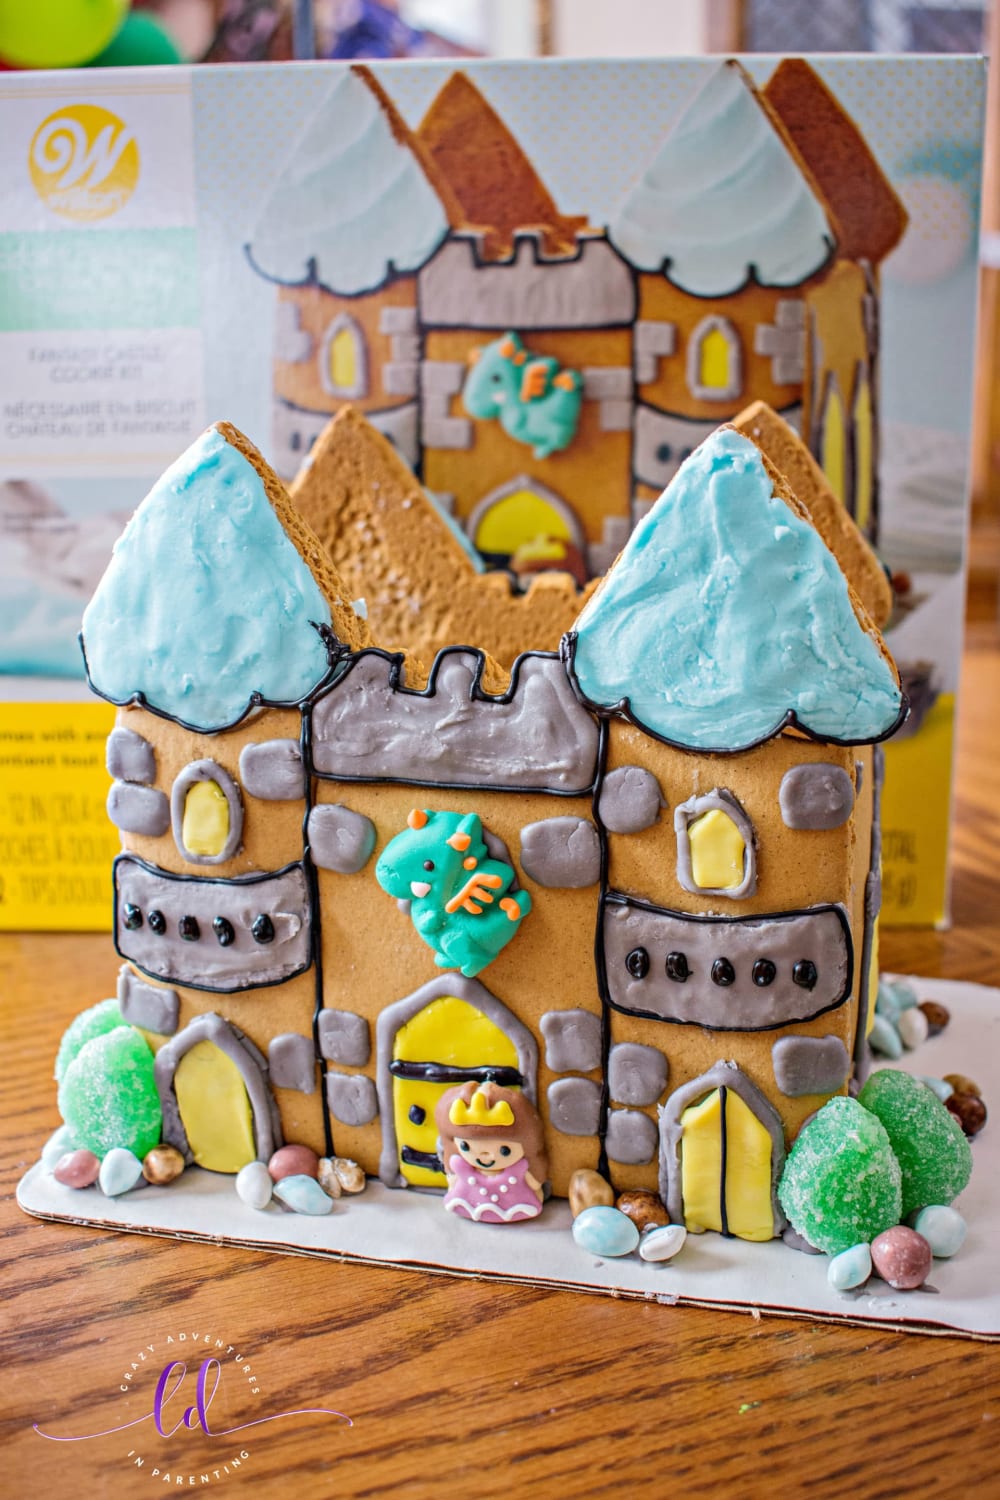 Fun with Wilton Cookie Creations Activity Kits